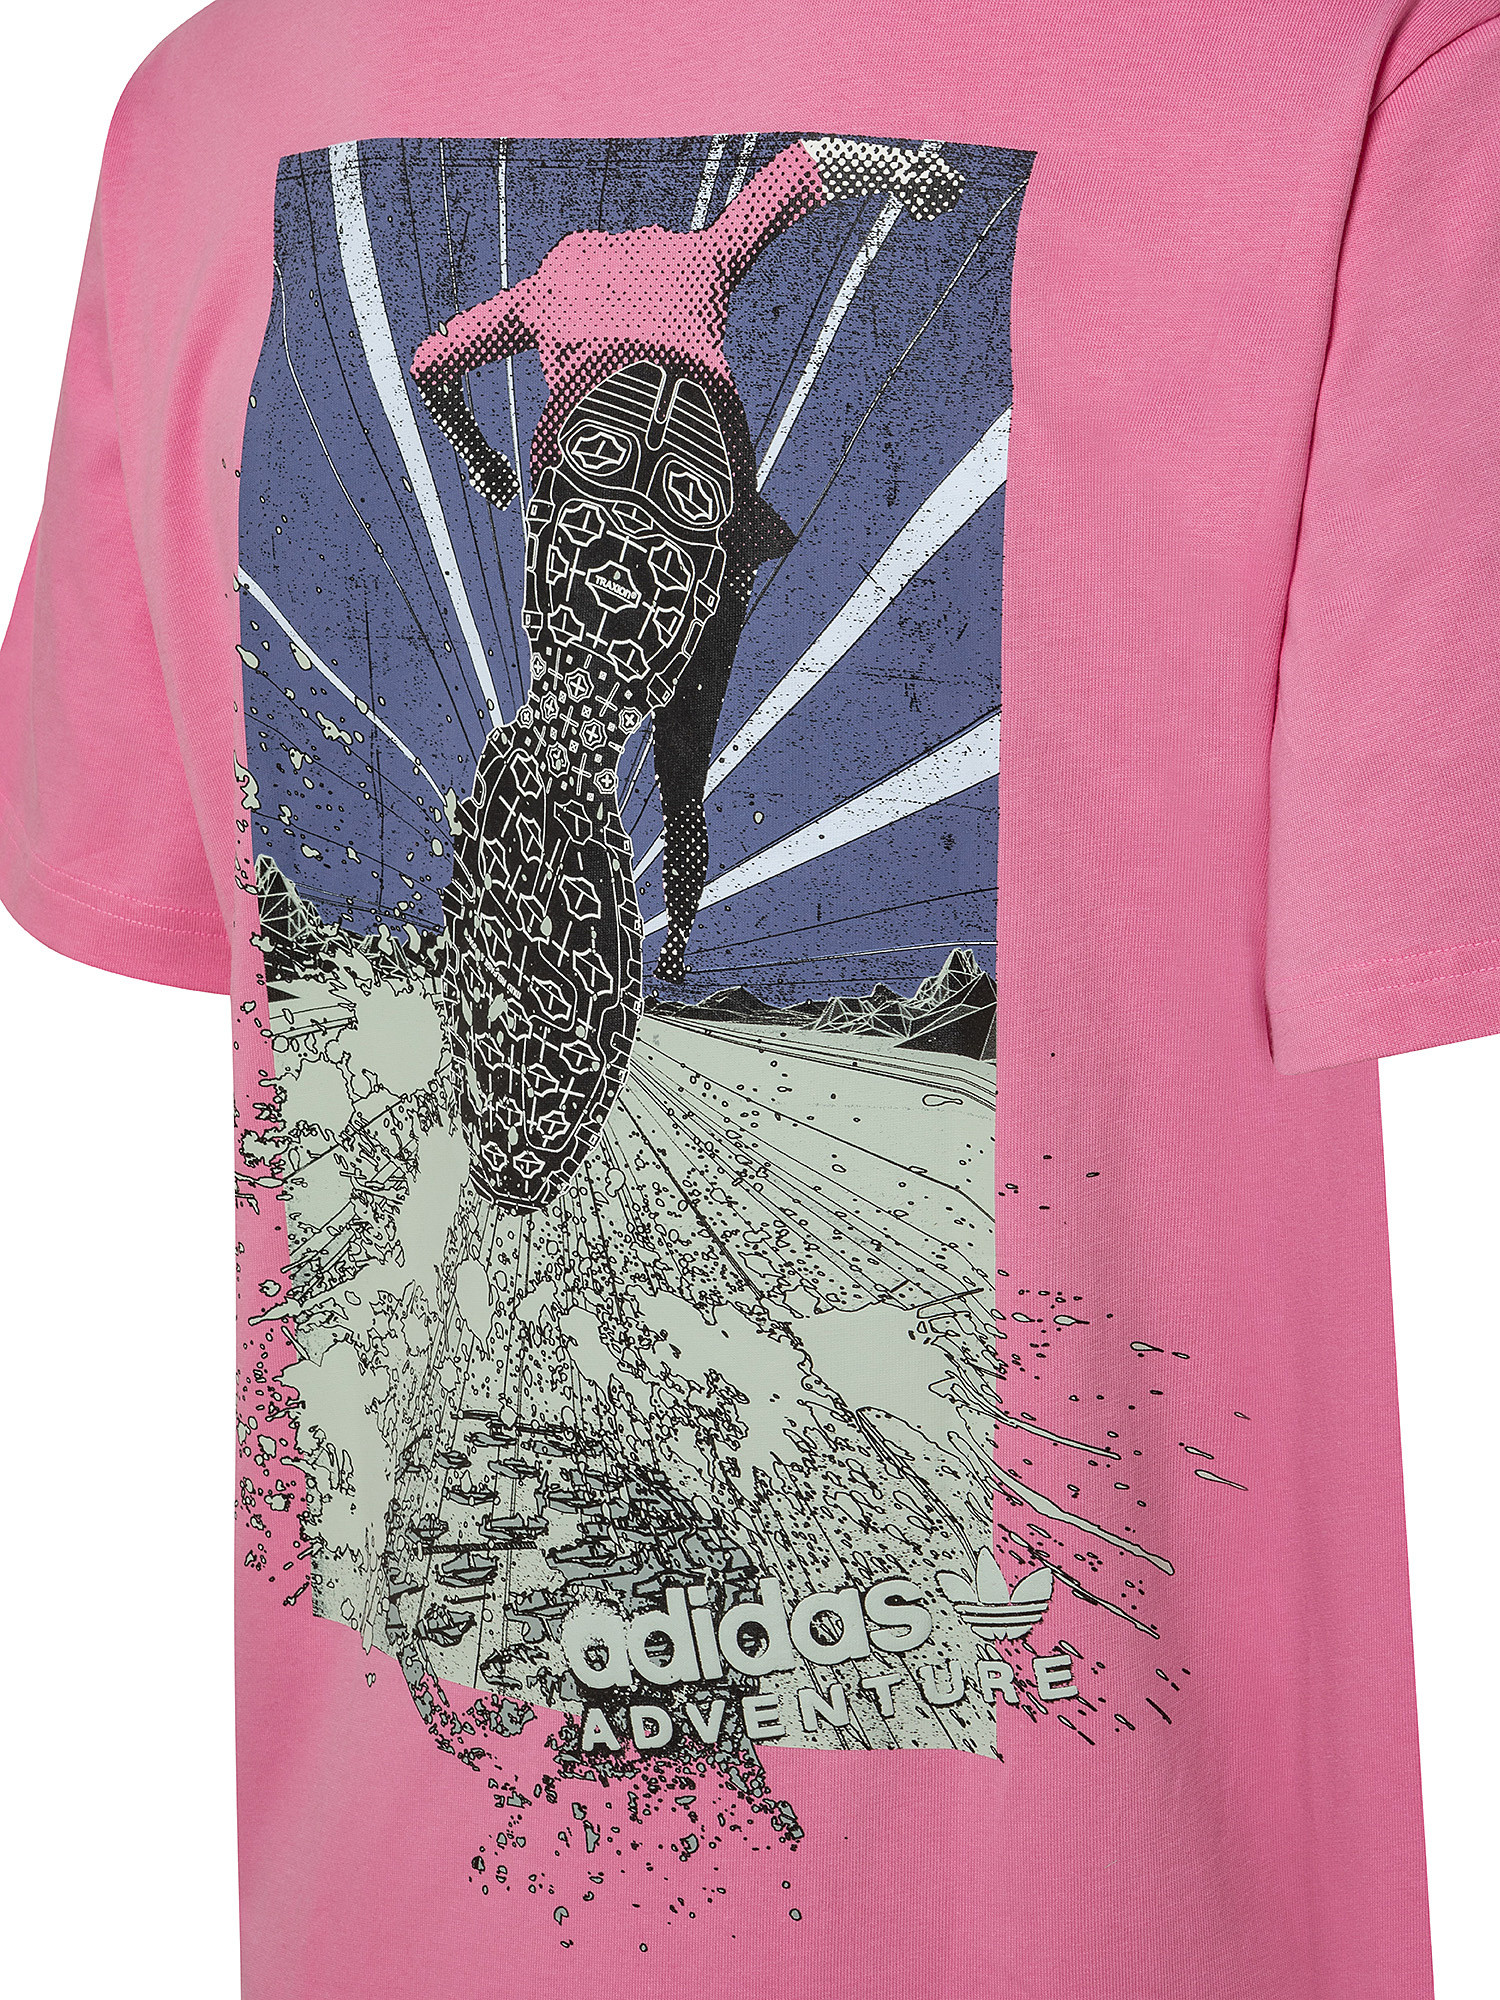 Adidas - Adventure trail T-shirt, Pink, large image number 2